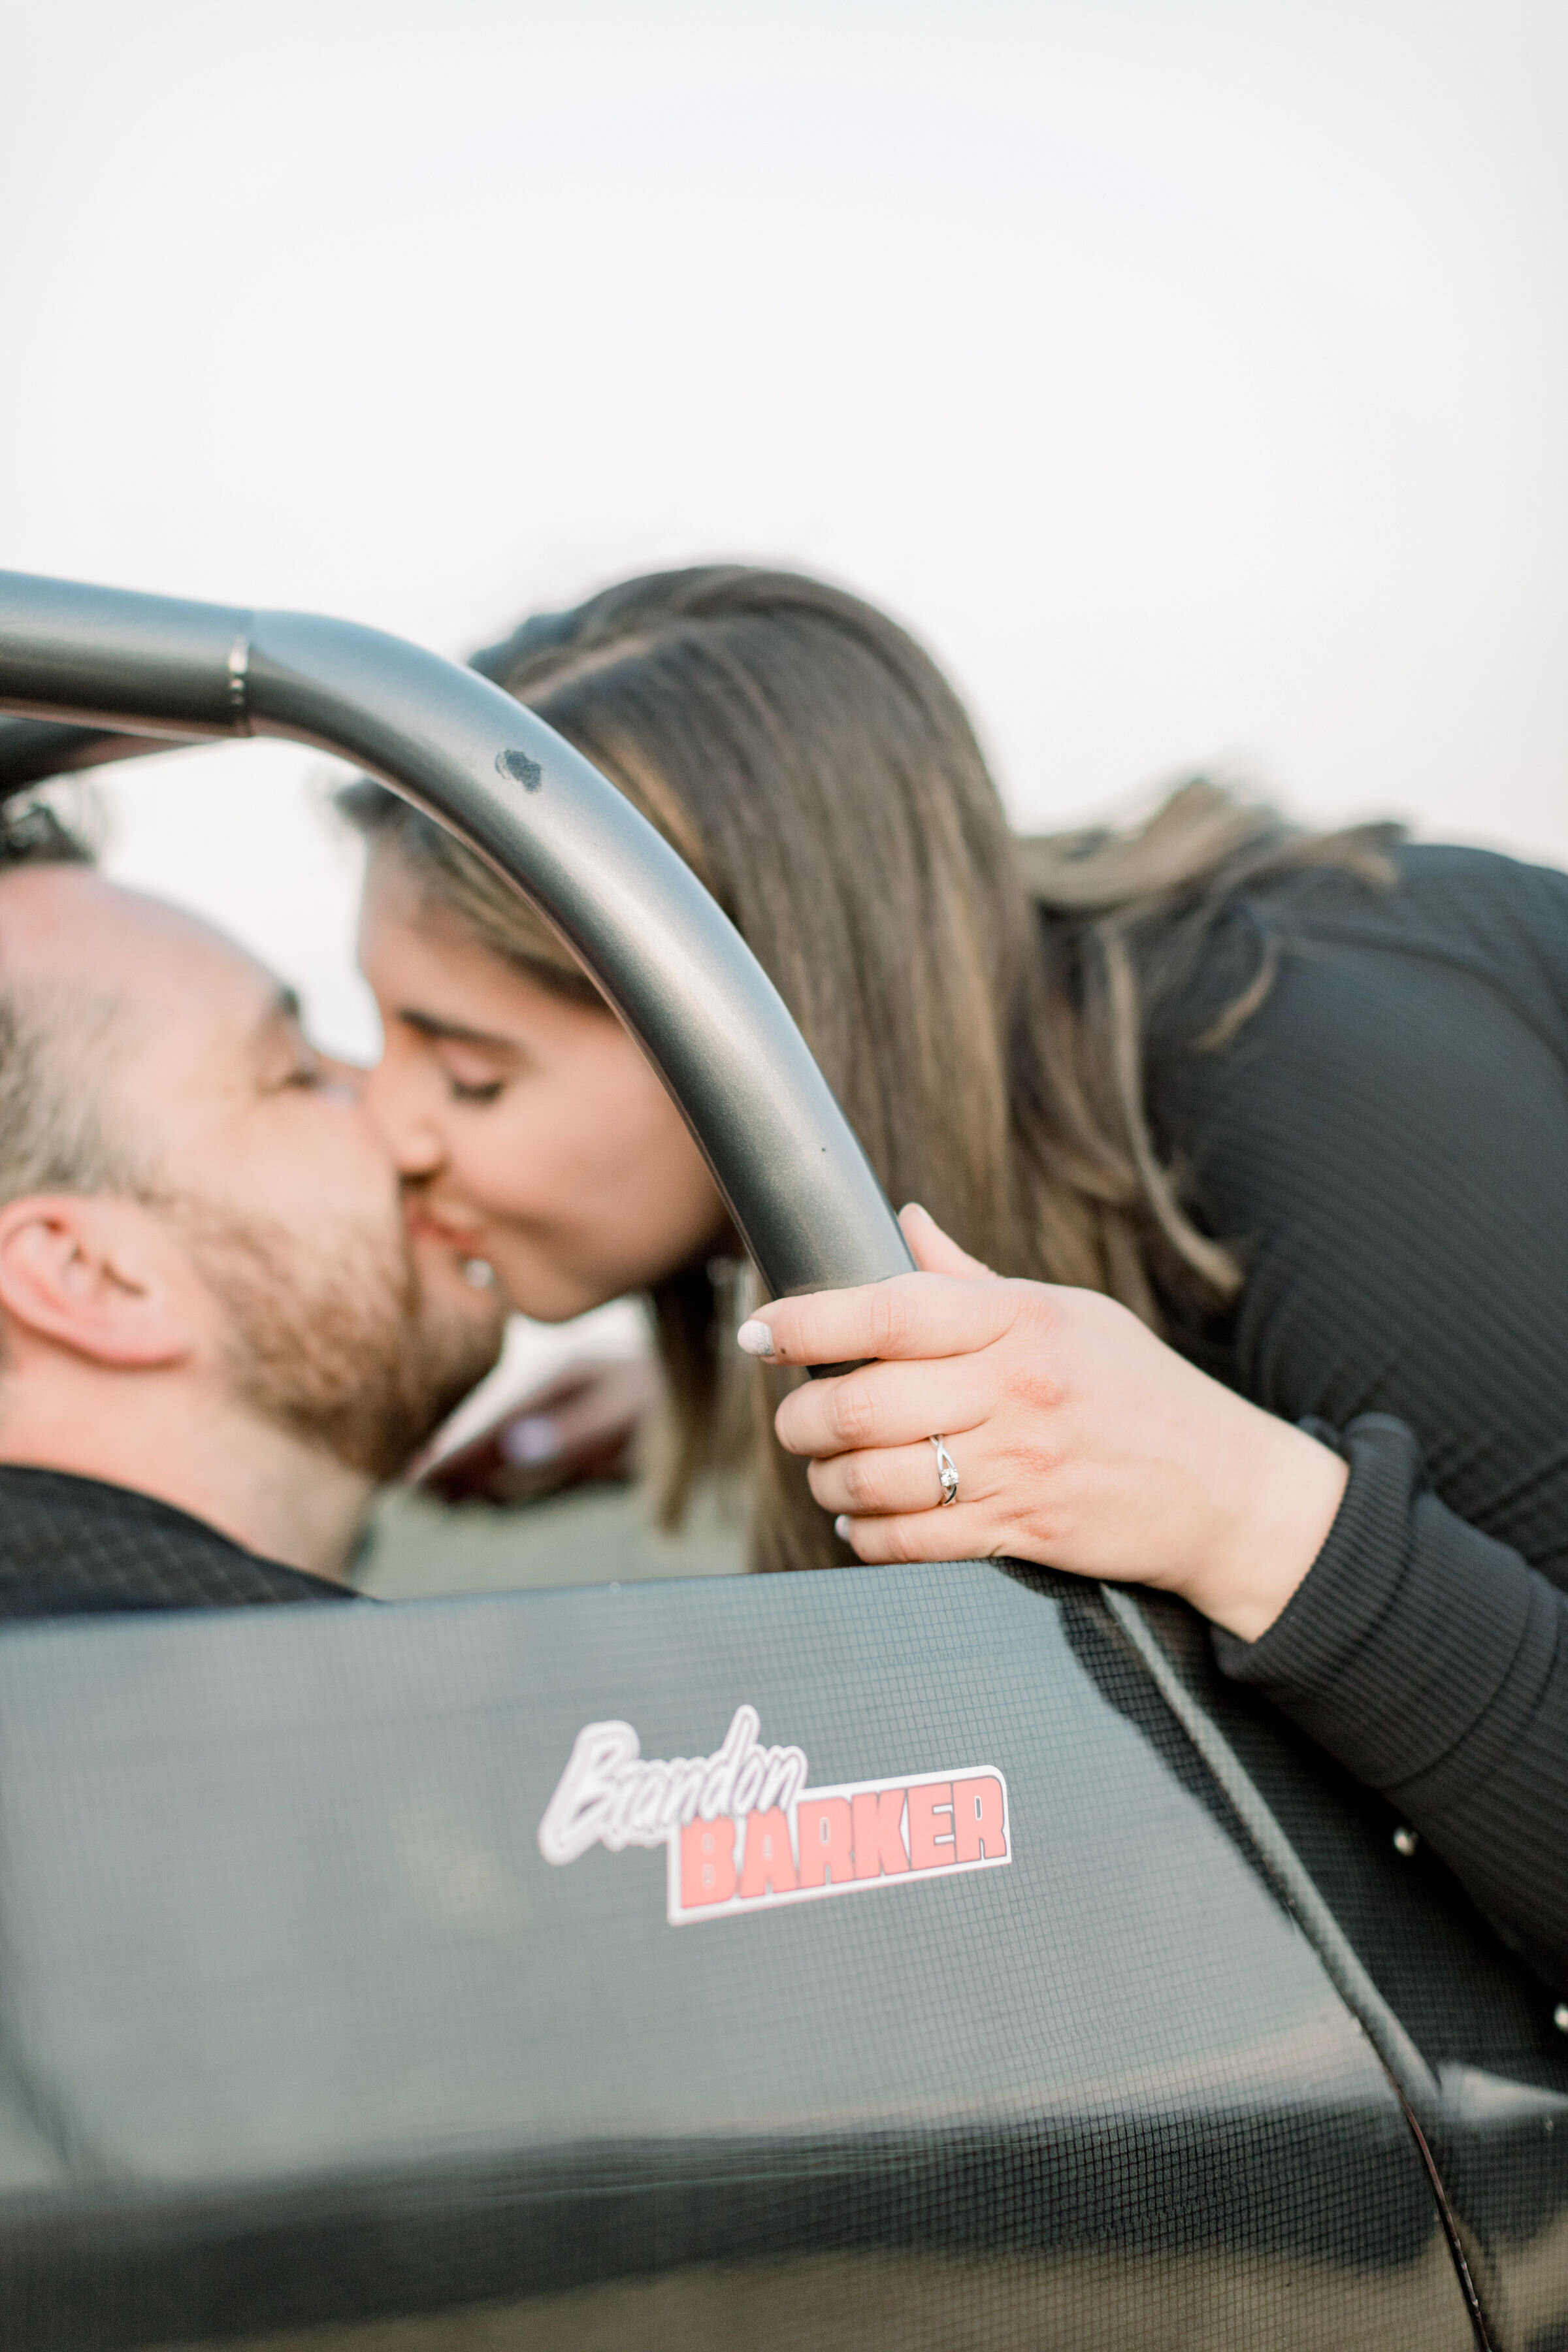  Detail shot of engagement diamond ring with a couple kissing in a car at a racetrack by Chelsea Mason in Ottawa, ON. wedding ring ideas engagement ring inspo simple wedding rings for bride wedding ring photography detail shot car in engagement photo